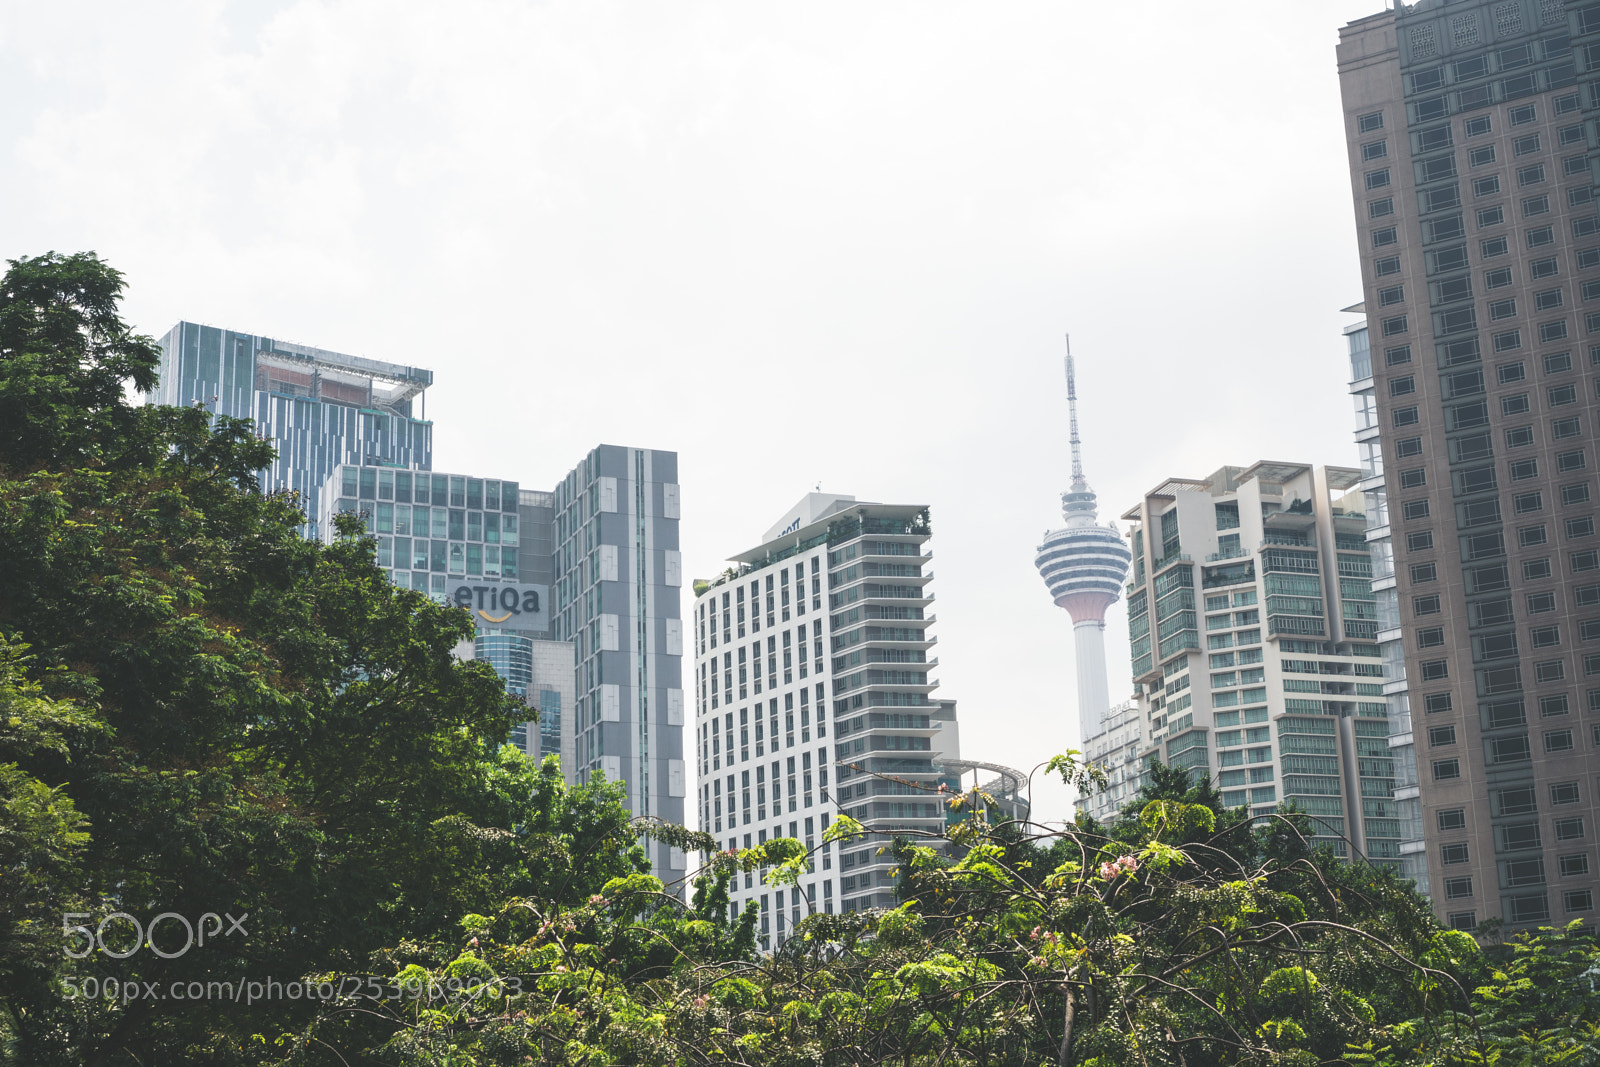 Sony a6300 sample photo. Kl tower afternoon photography